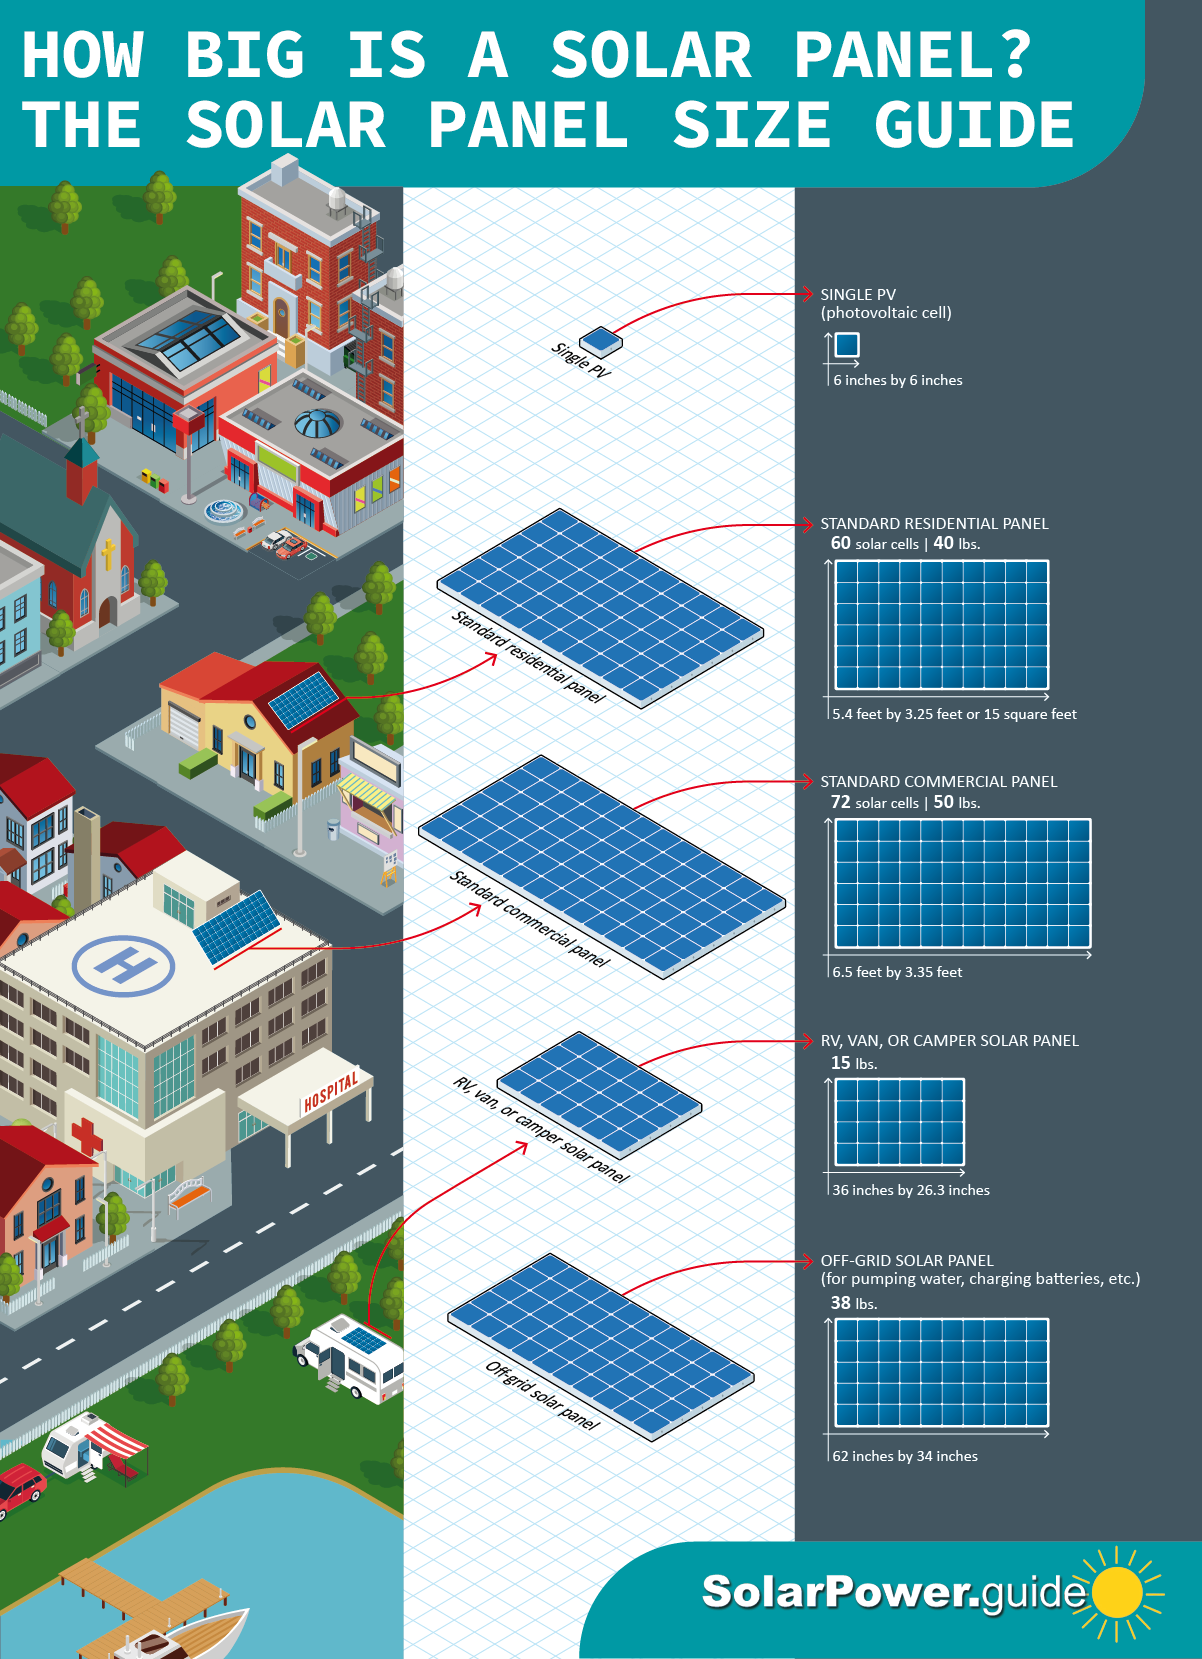 How Big is a Solar Panel? The Solar Panel Size Guide - Solar Power Guide Solar Energy Information - Infographic